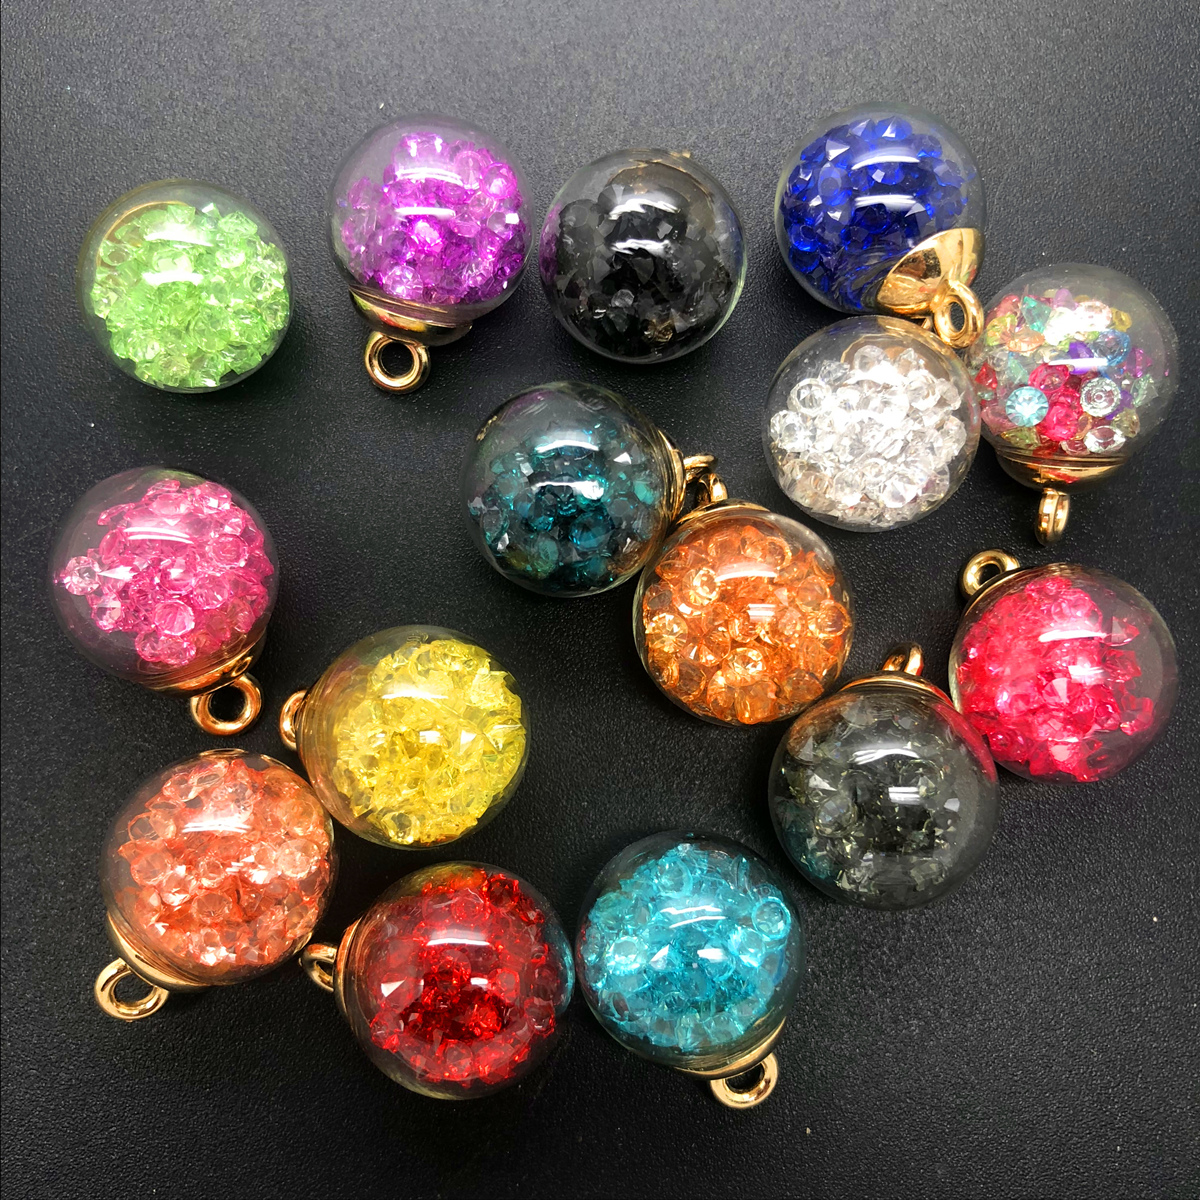 https://img.kwcdn.com/product/with-beads-pendant-ornaments/d69d2f15w98k18-27b52ee6/open/2022-10-30/1667121960373-7e4f1027cff647969501fb9b1816aa9c-goods.jpeg?imageView2/2/w/500/q/60/format/webp